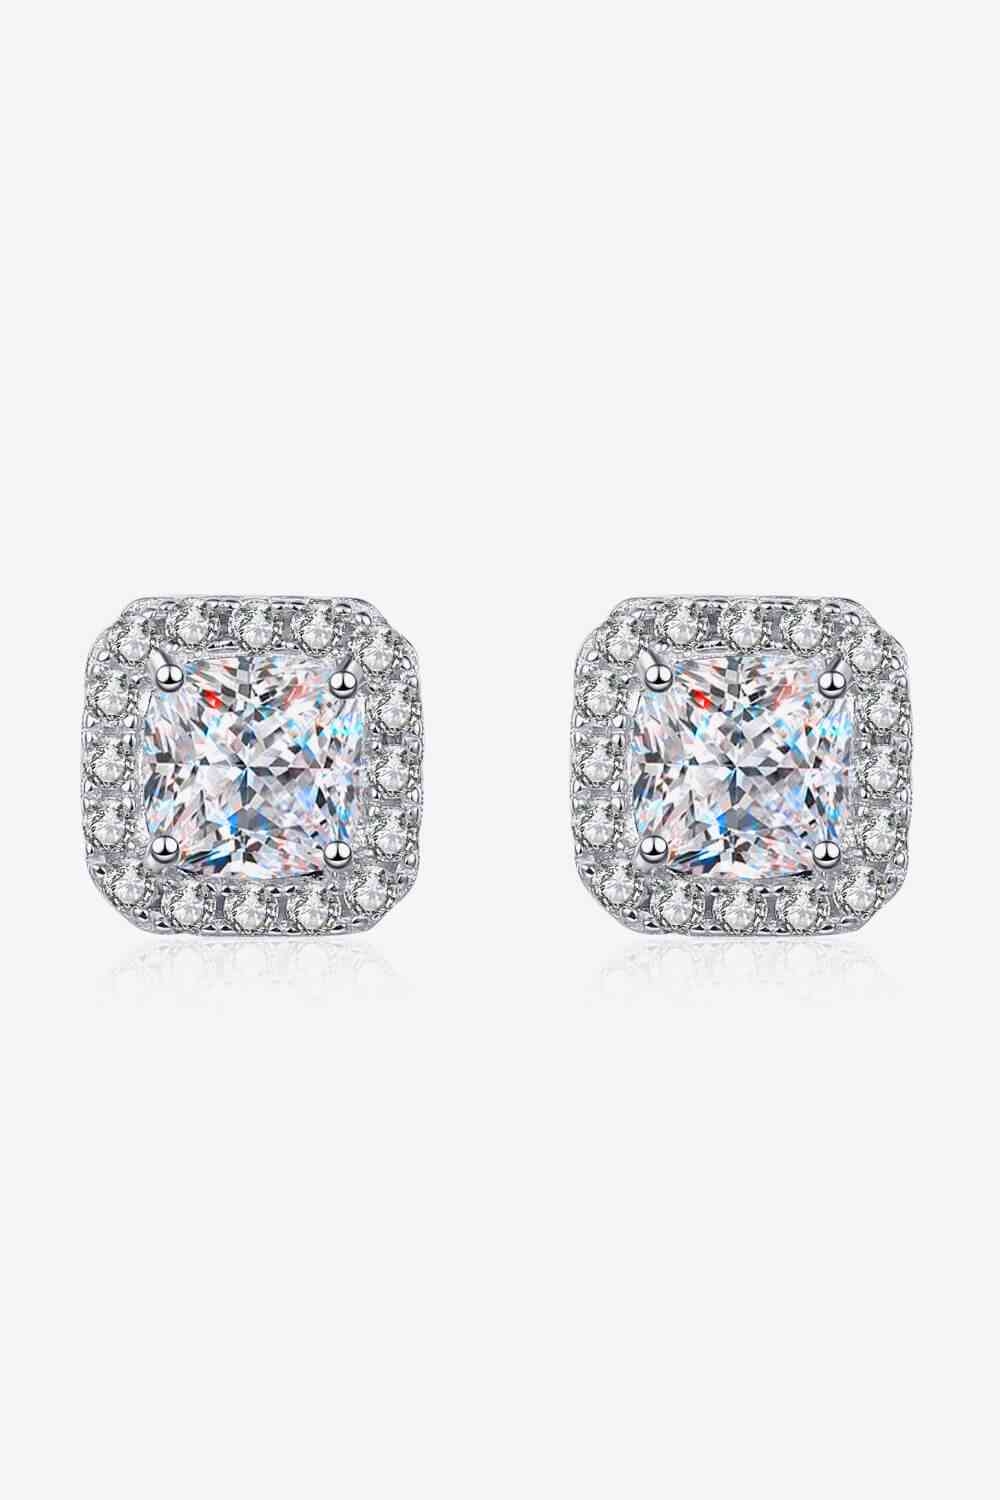 a pair of square shaped diamond earrings